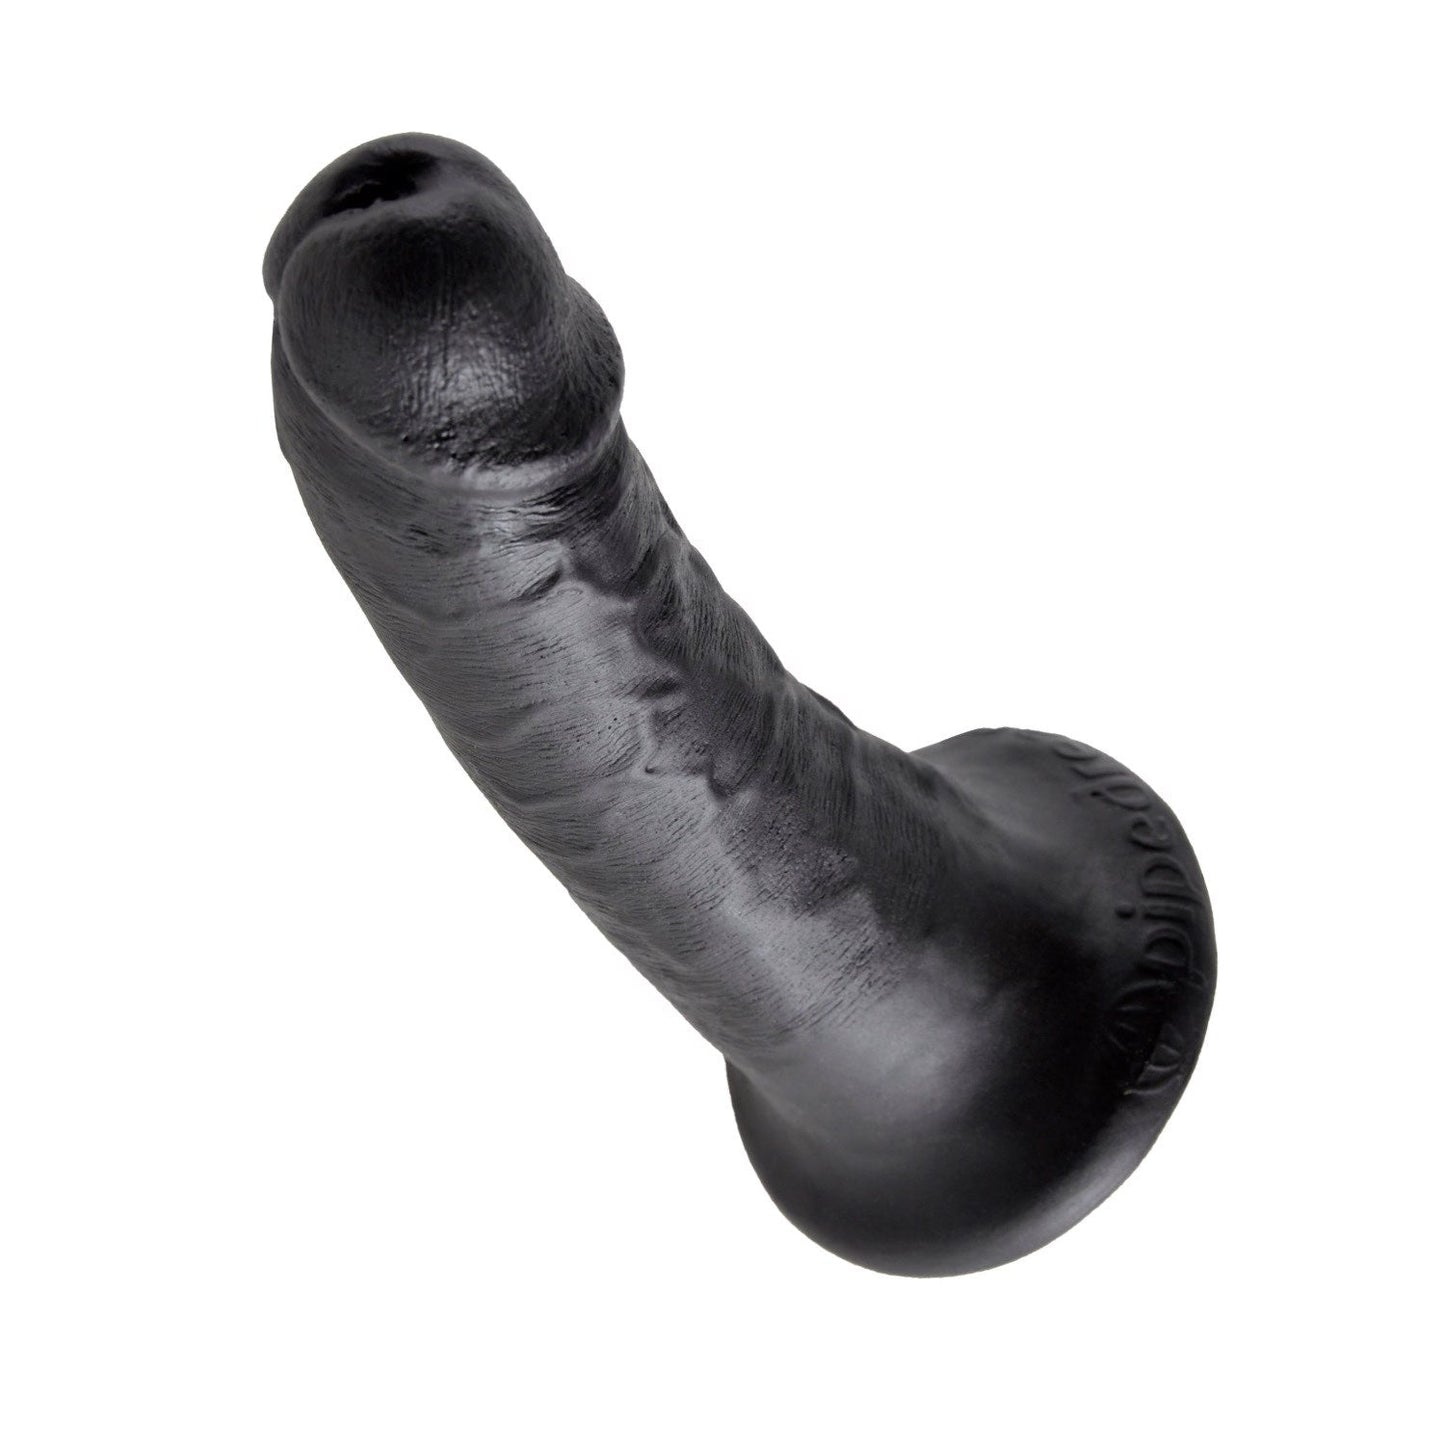 6" Cock - Black 15.2 cm (6") Dong)